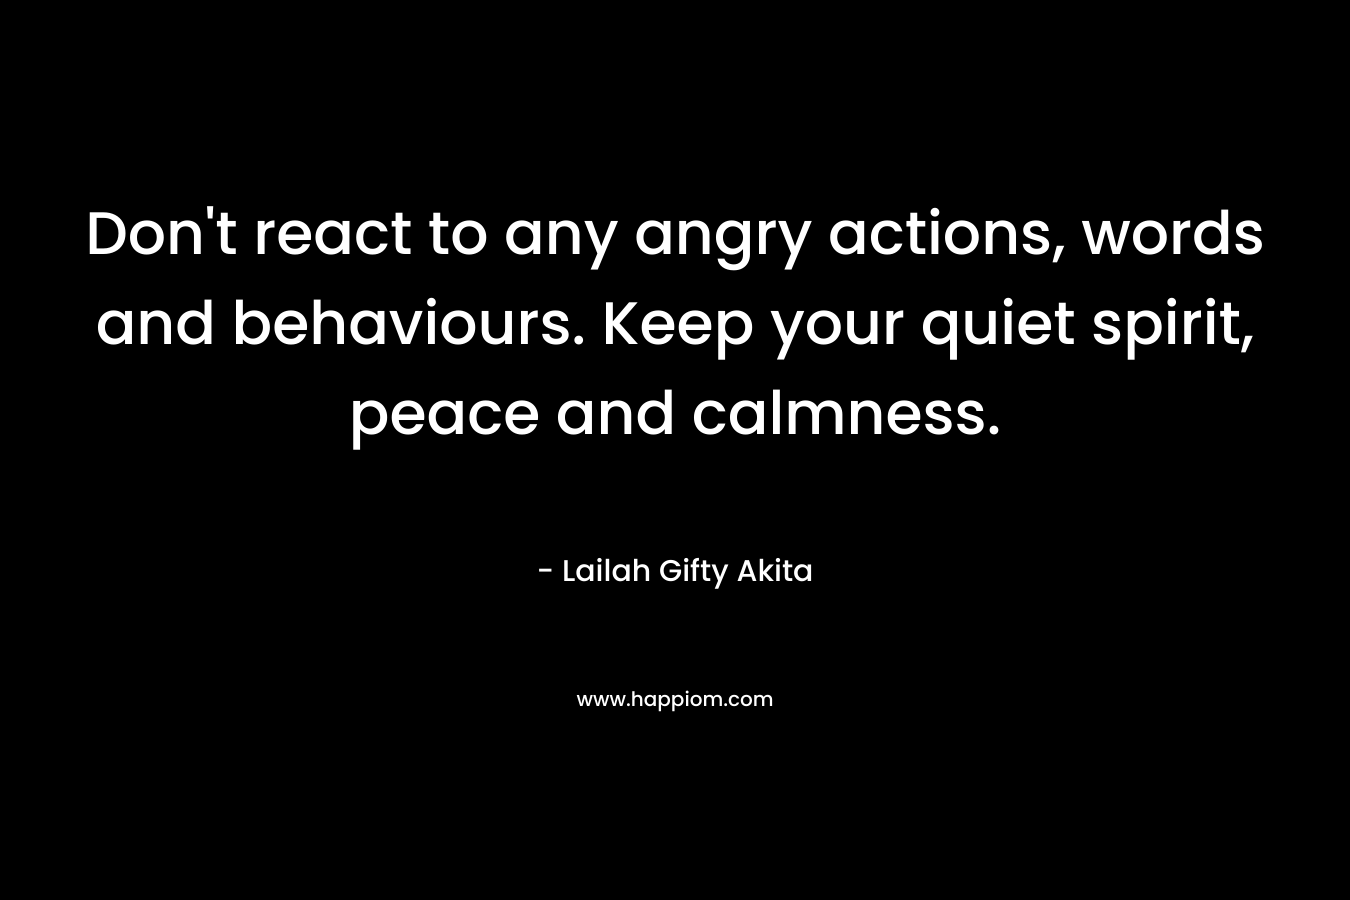 Don't react to any angry actions, words and behaviours. Keep your quiet spirit, peace and calmness.